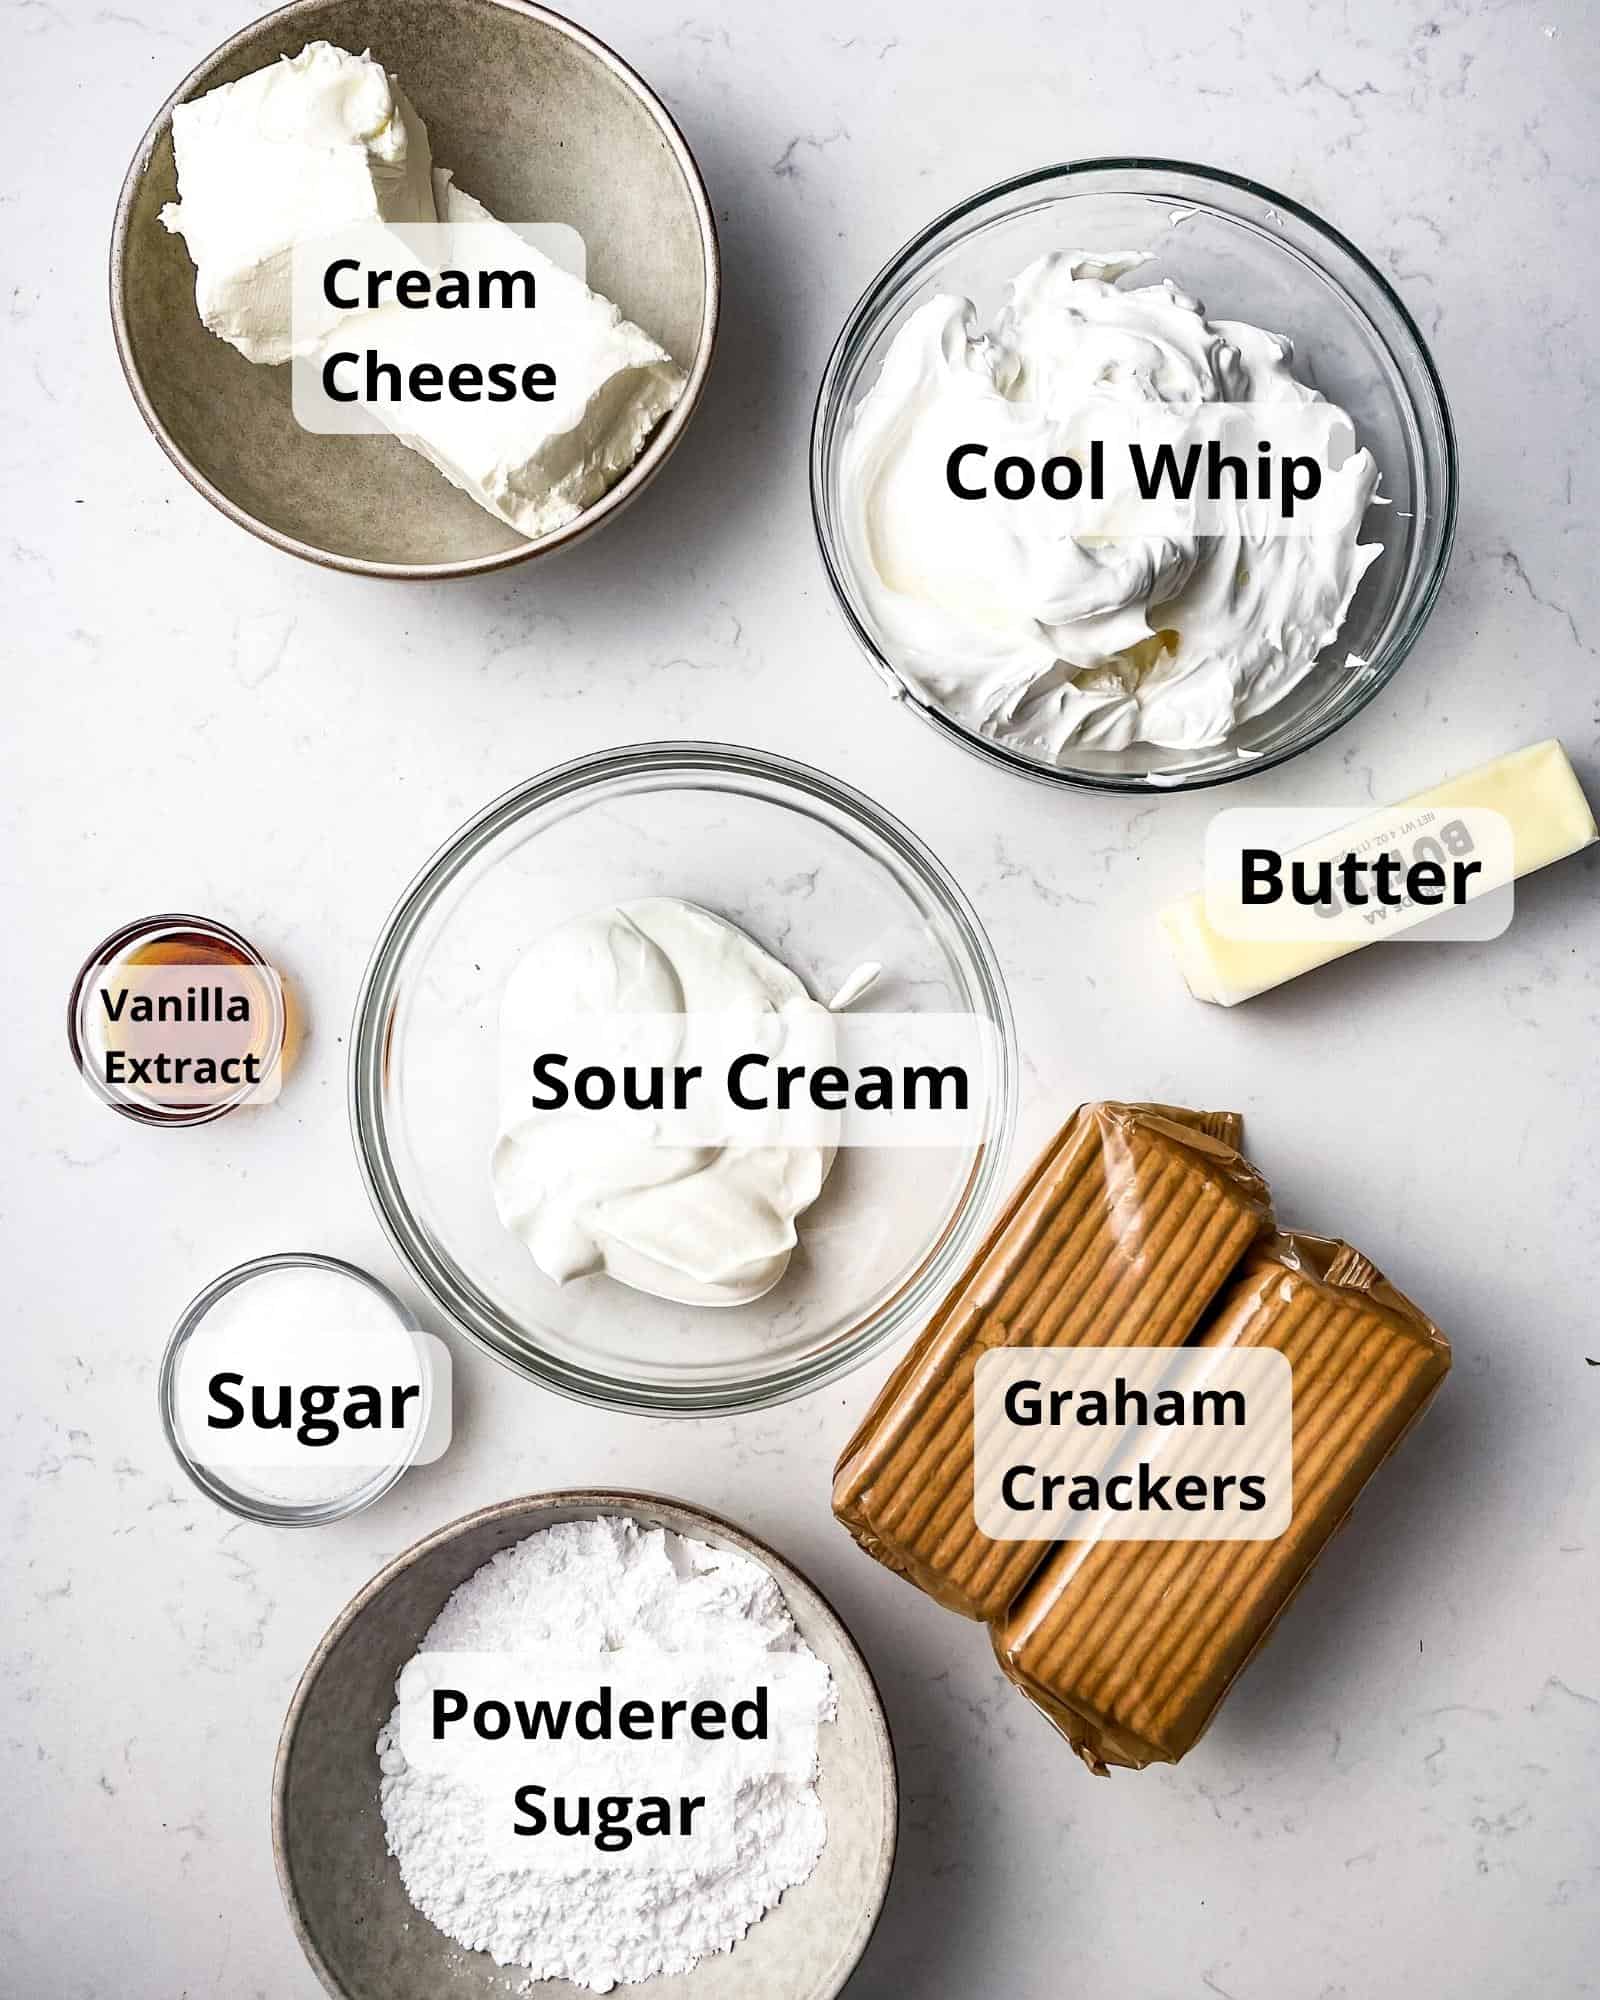 ingredients to make philadelphia no bake cheesecake - cream cheese, cool whip, sour cream, butter, vanilla extract, graham crackers, butter, powdered sugar, and sugar.